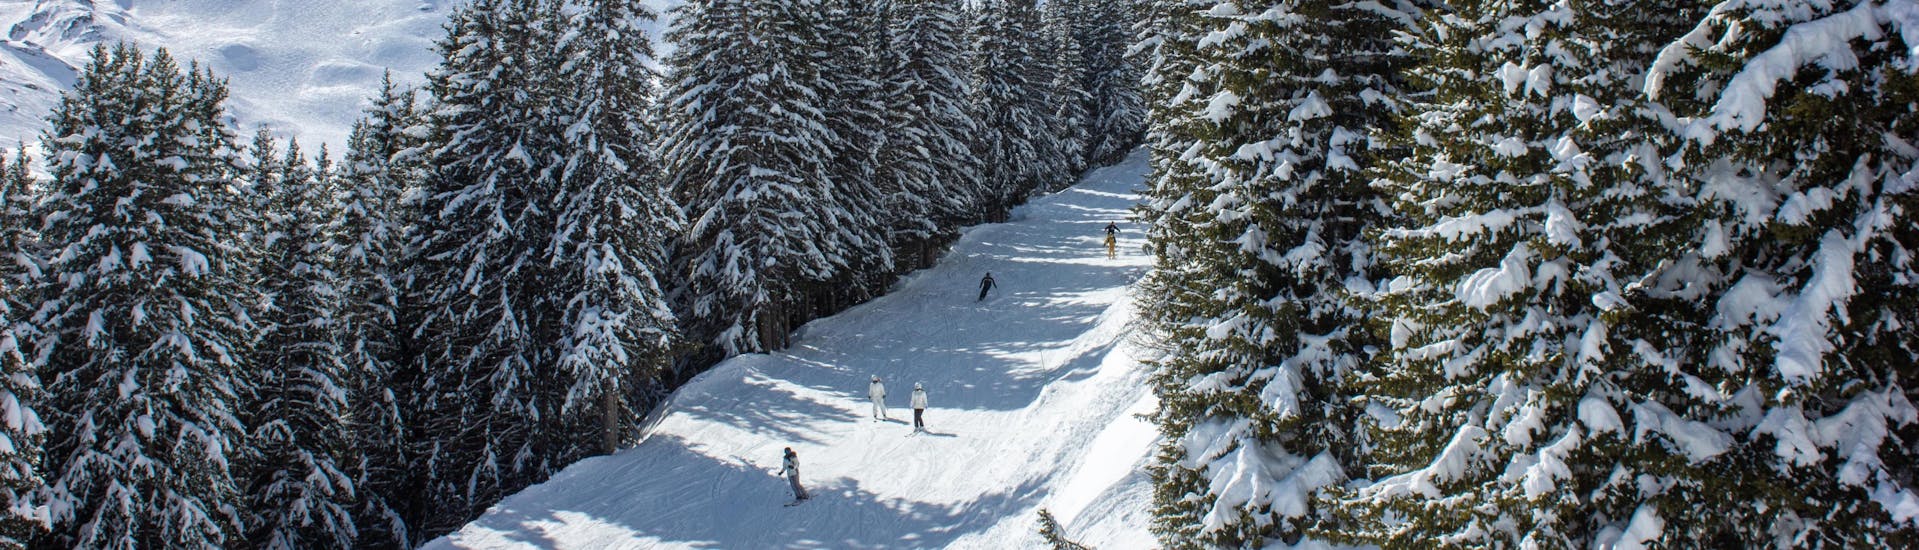 A group of skiers descend snow-covered mountain in La Tania in Courchevel during the winter season.